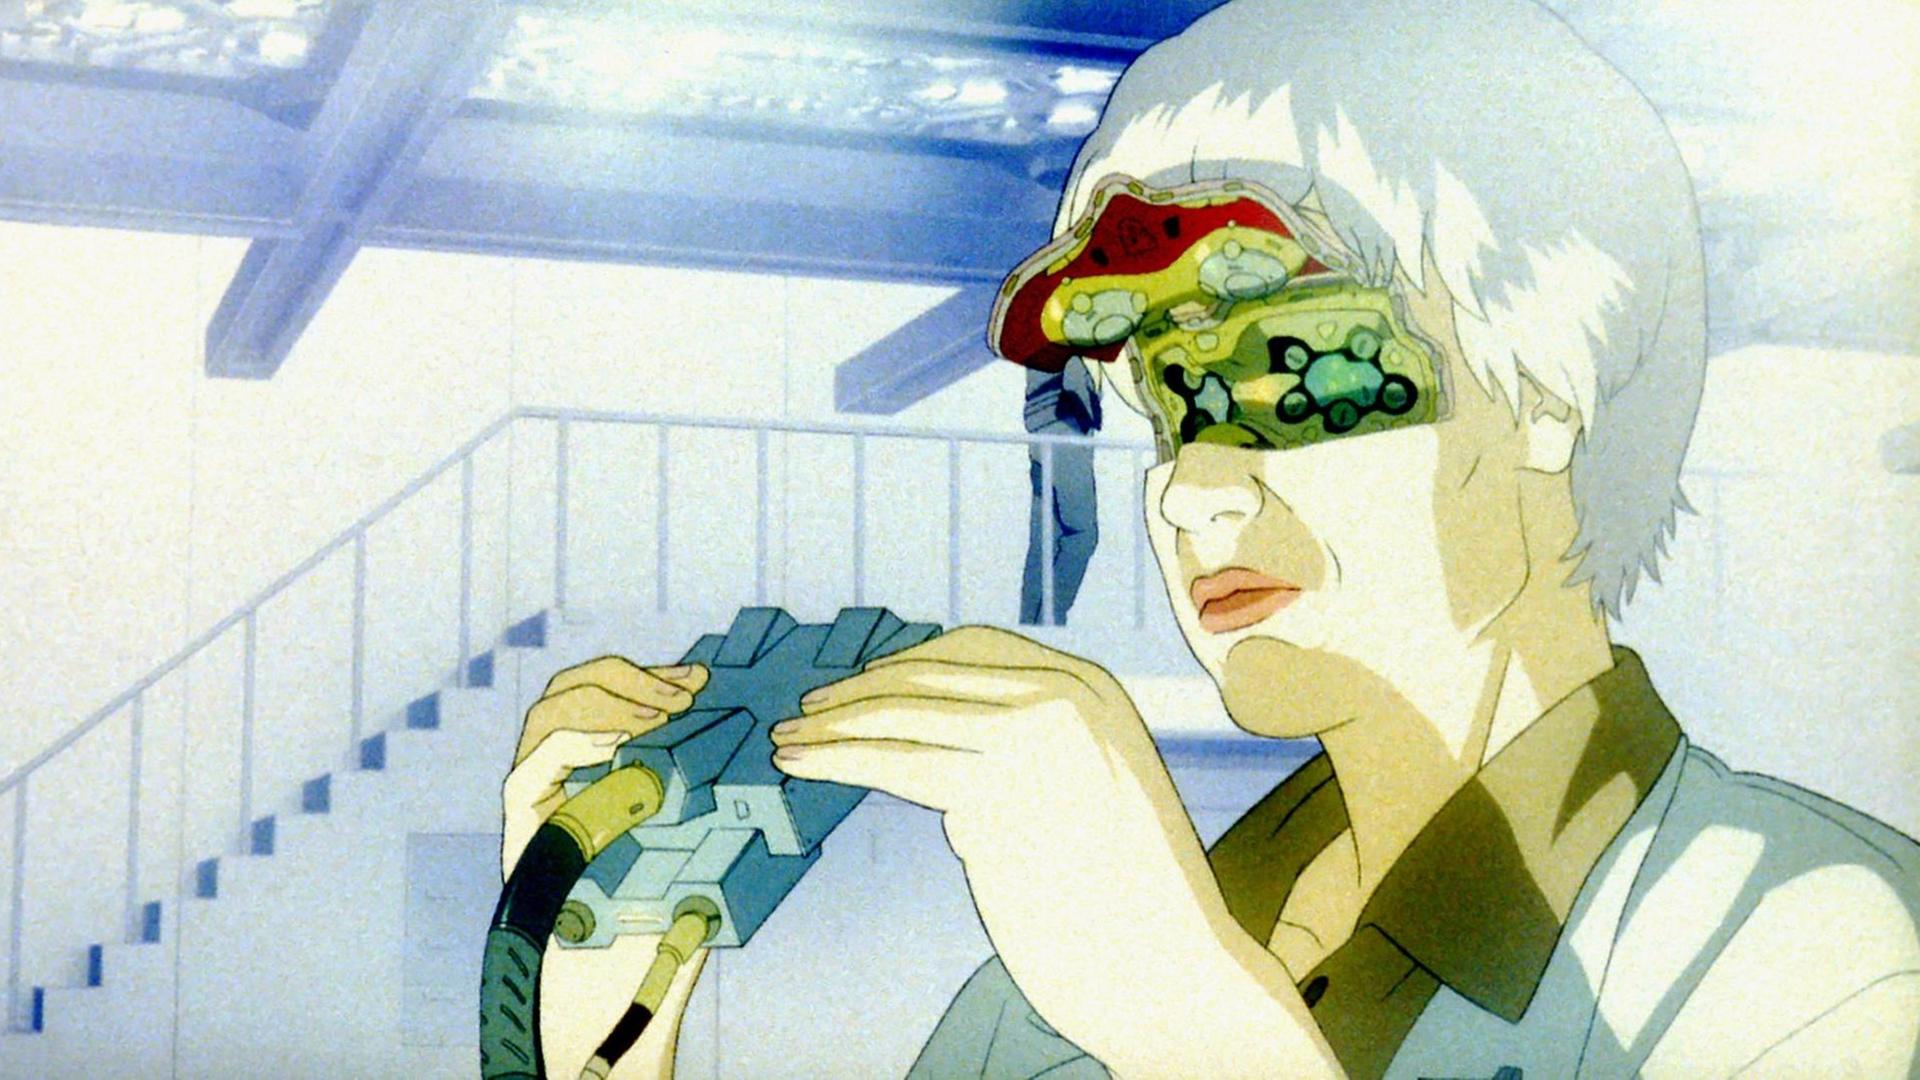 Scene aus dem Anime "Ghost in the Shell".